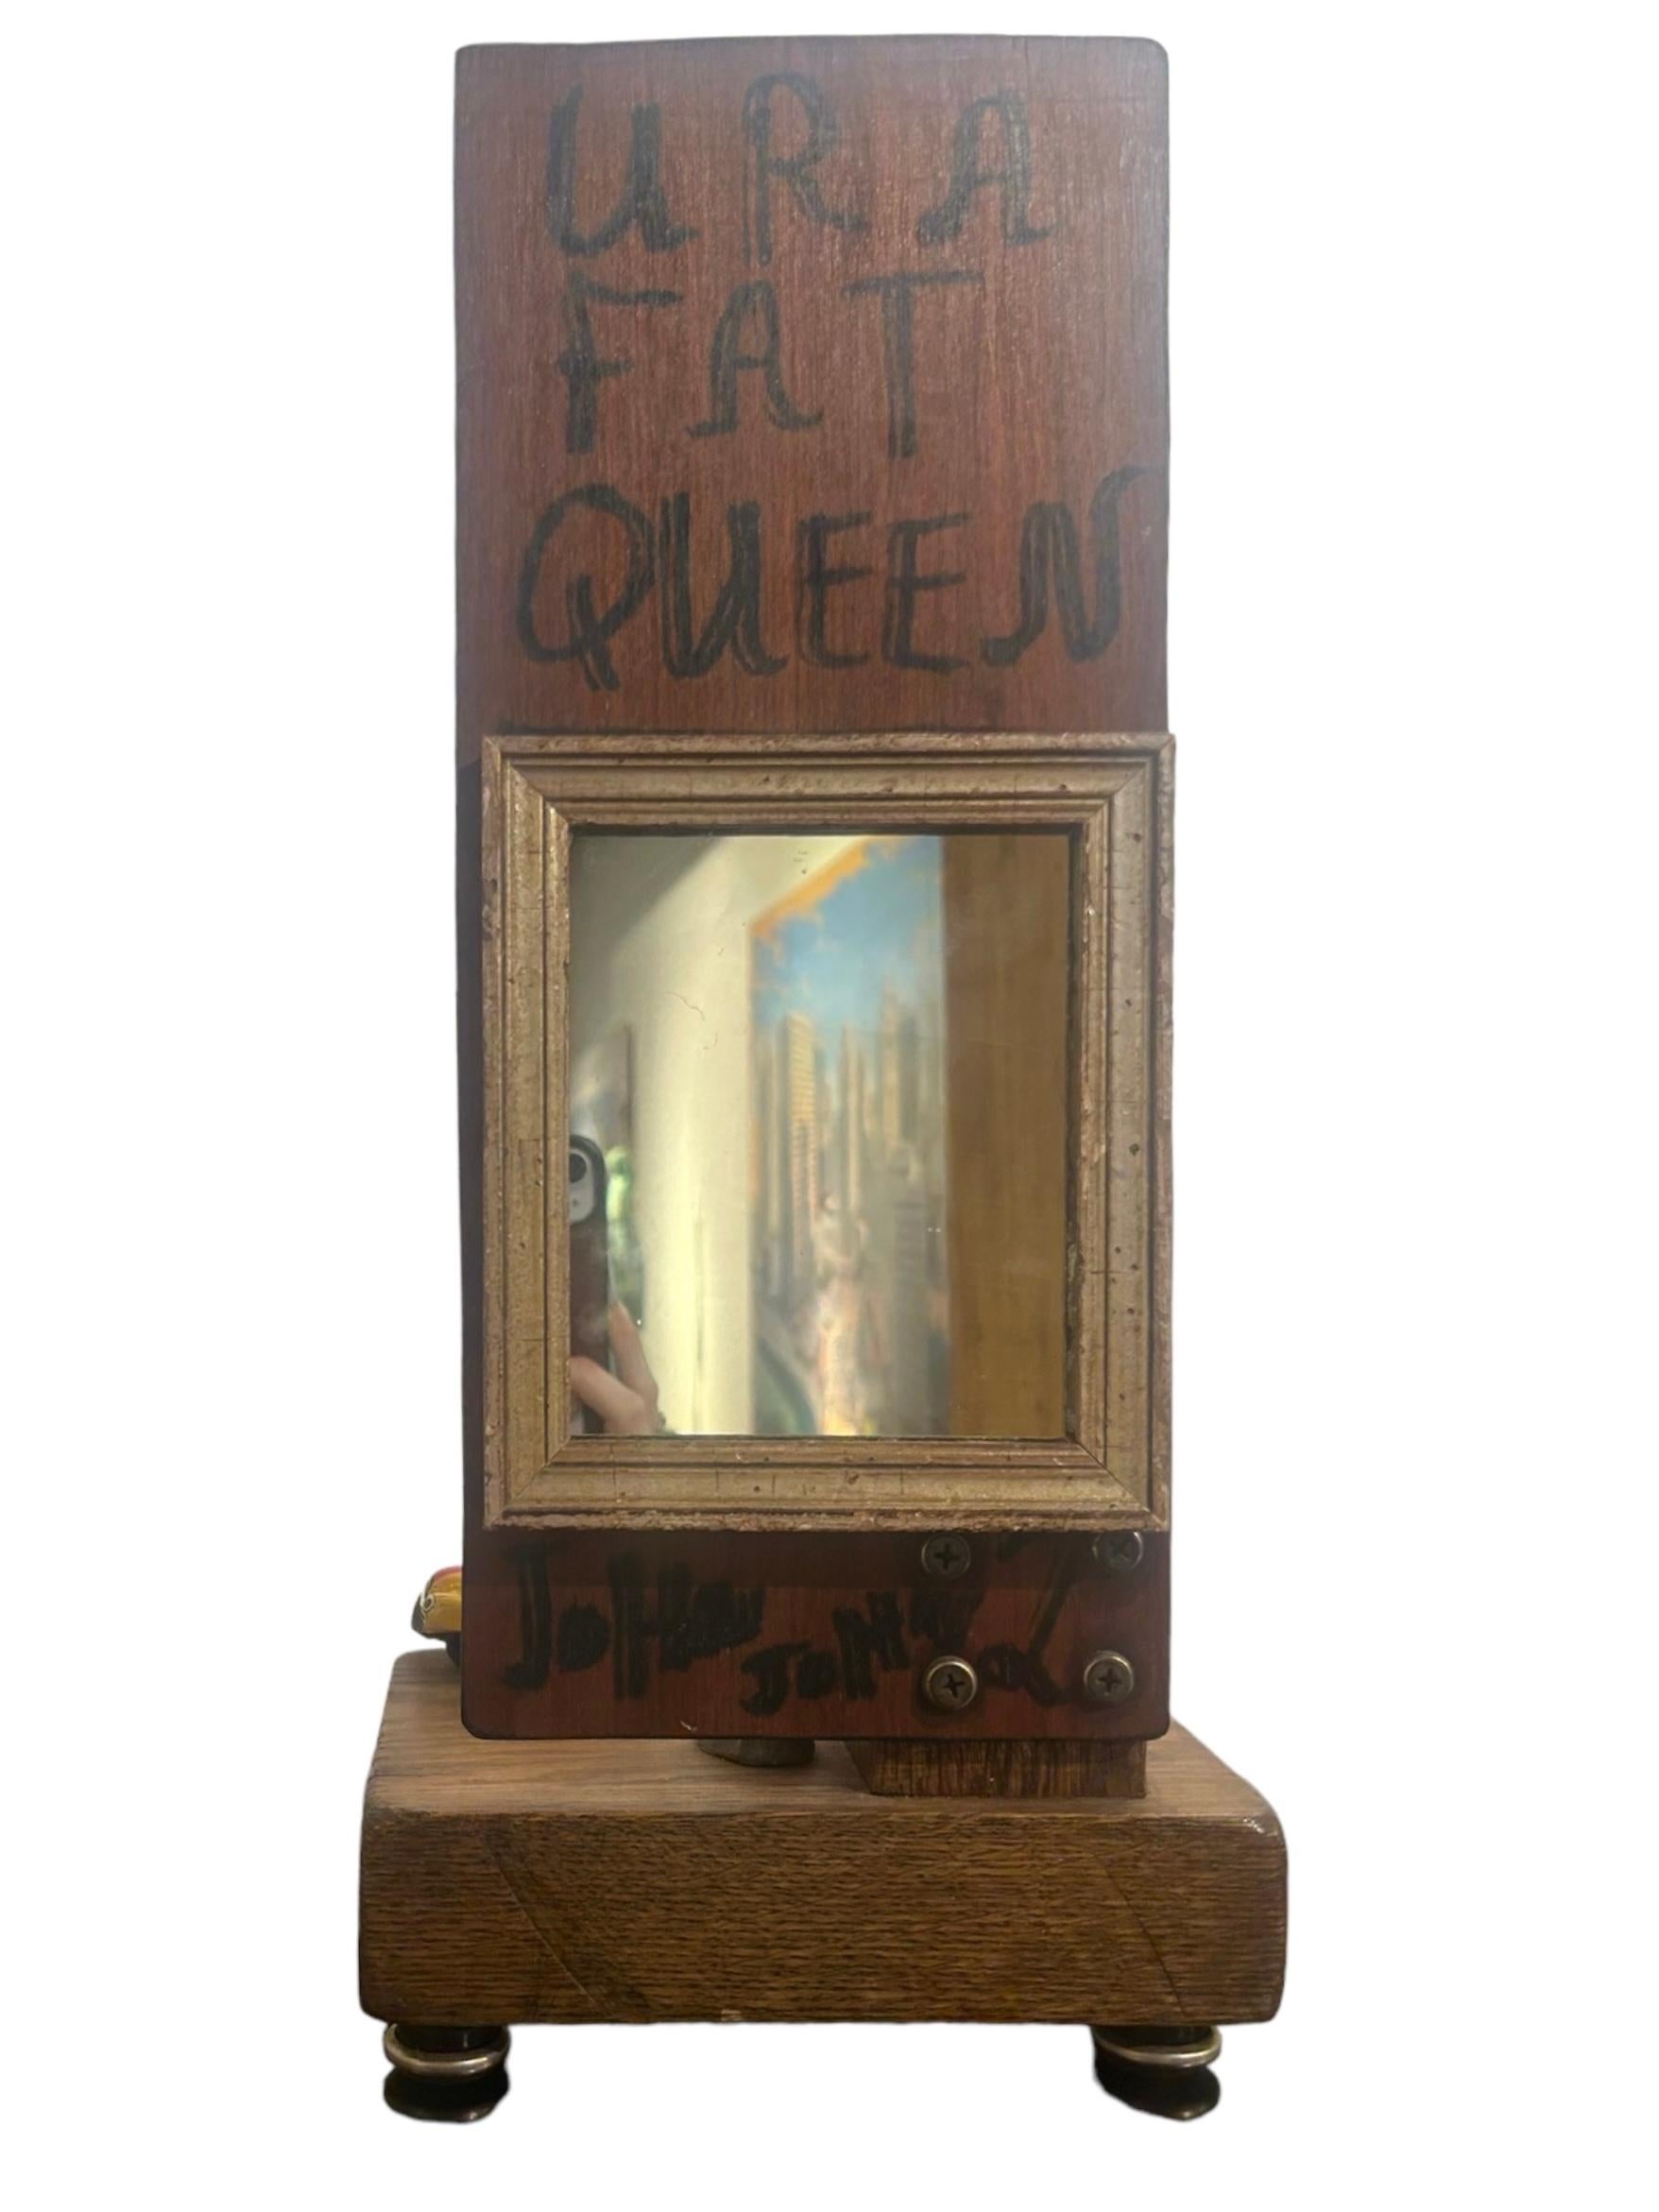 Self-taught artist John Seubert, AKA John Dolly, repurposes objects he uncovers as he rehabs older homes in Chicago. Here, a framed mirror is attached to the back of a multi object construction with  small figural painting. The pieces are attached